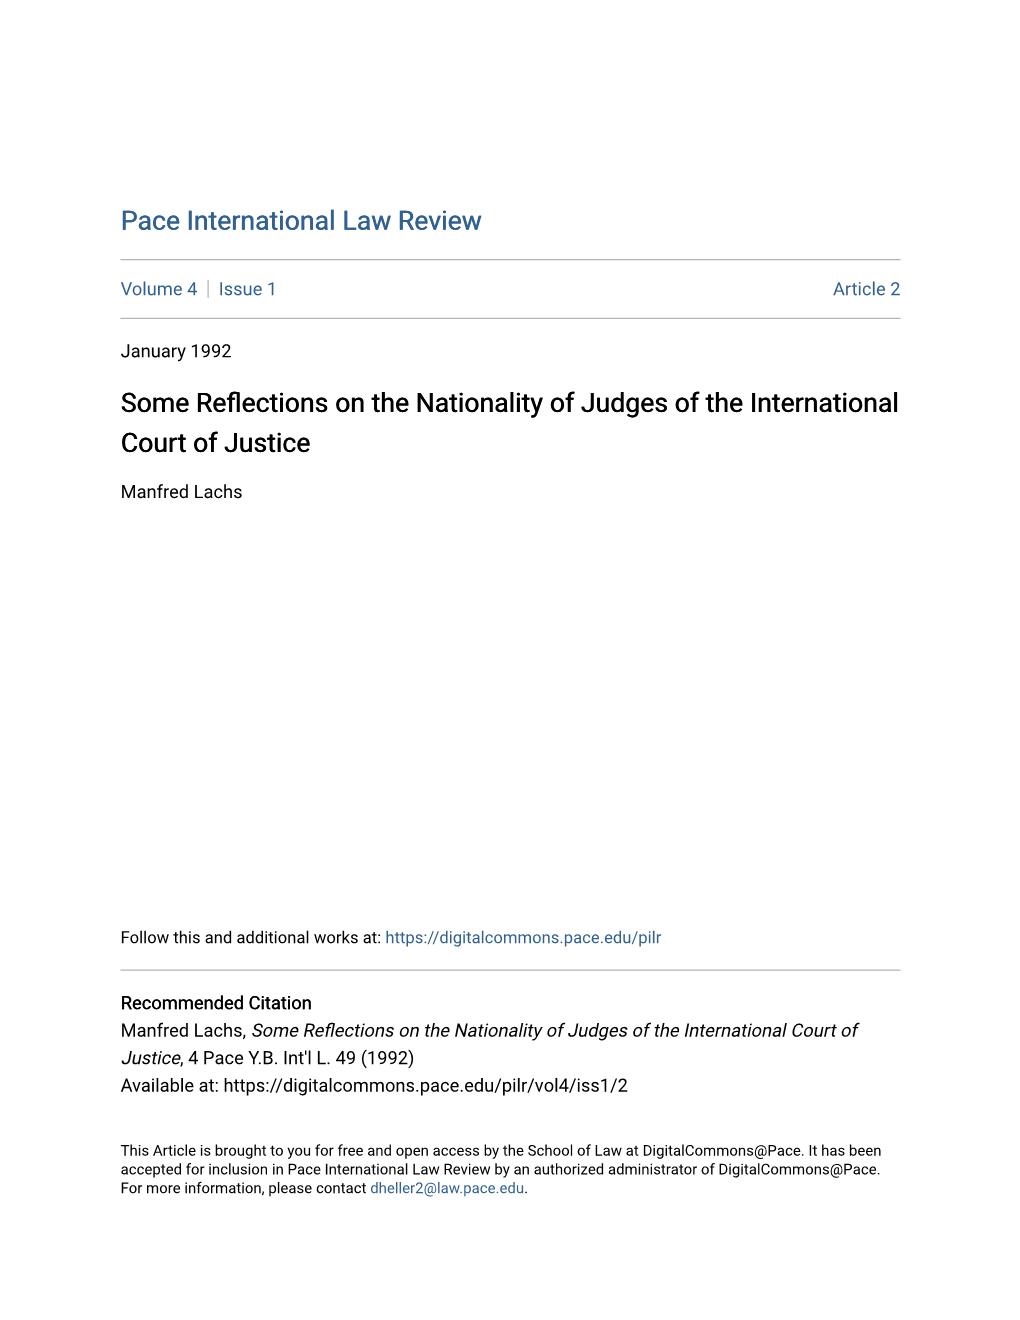 Some Reflections on the Nationality of Judges of the International Court of Justice